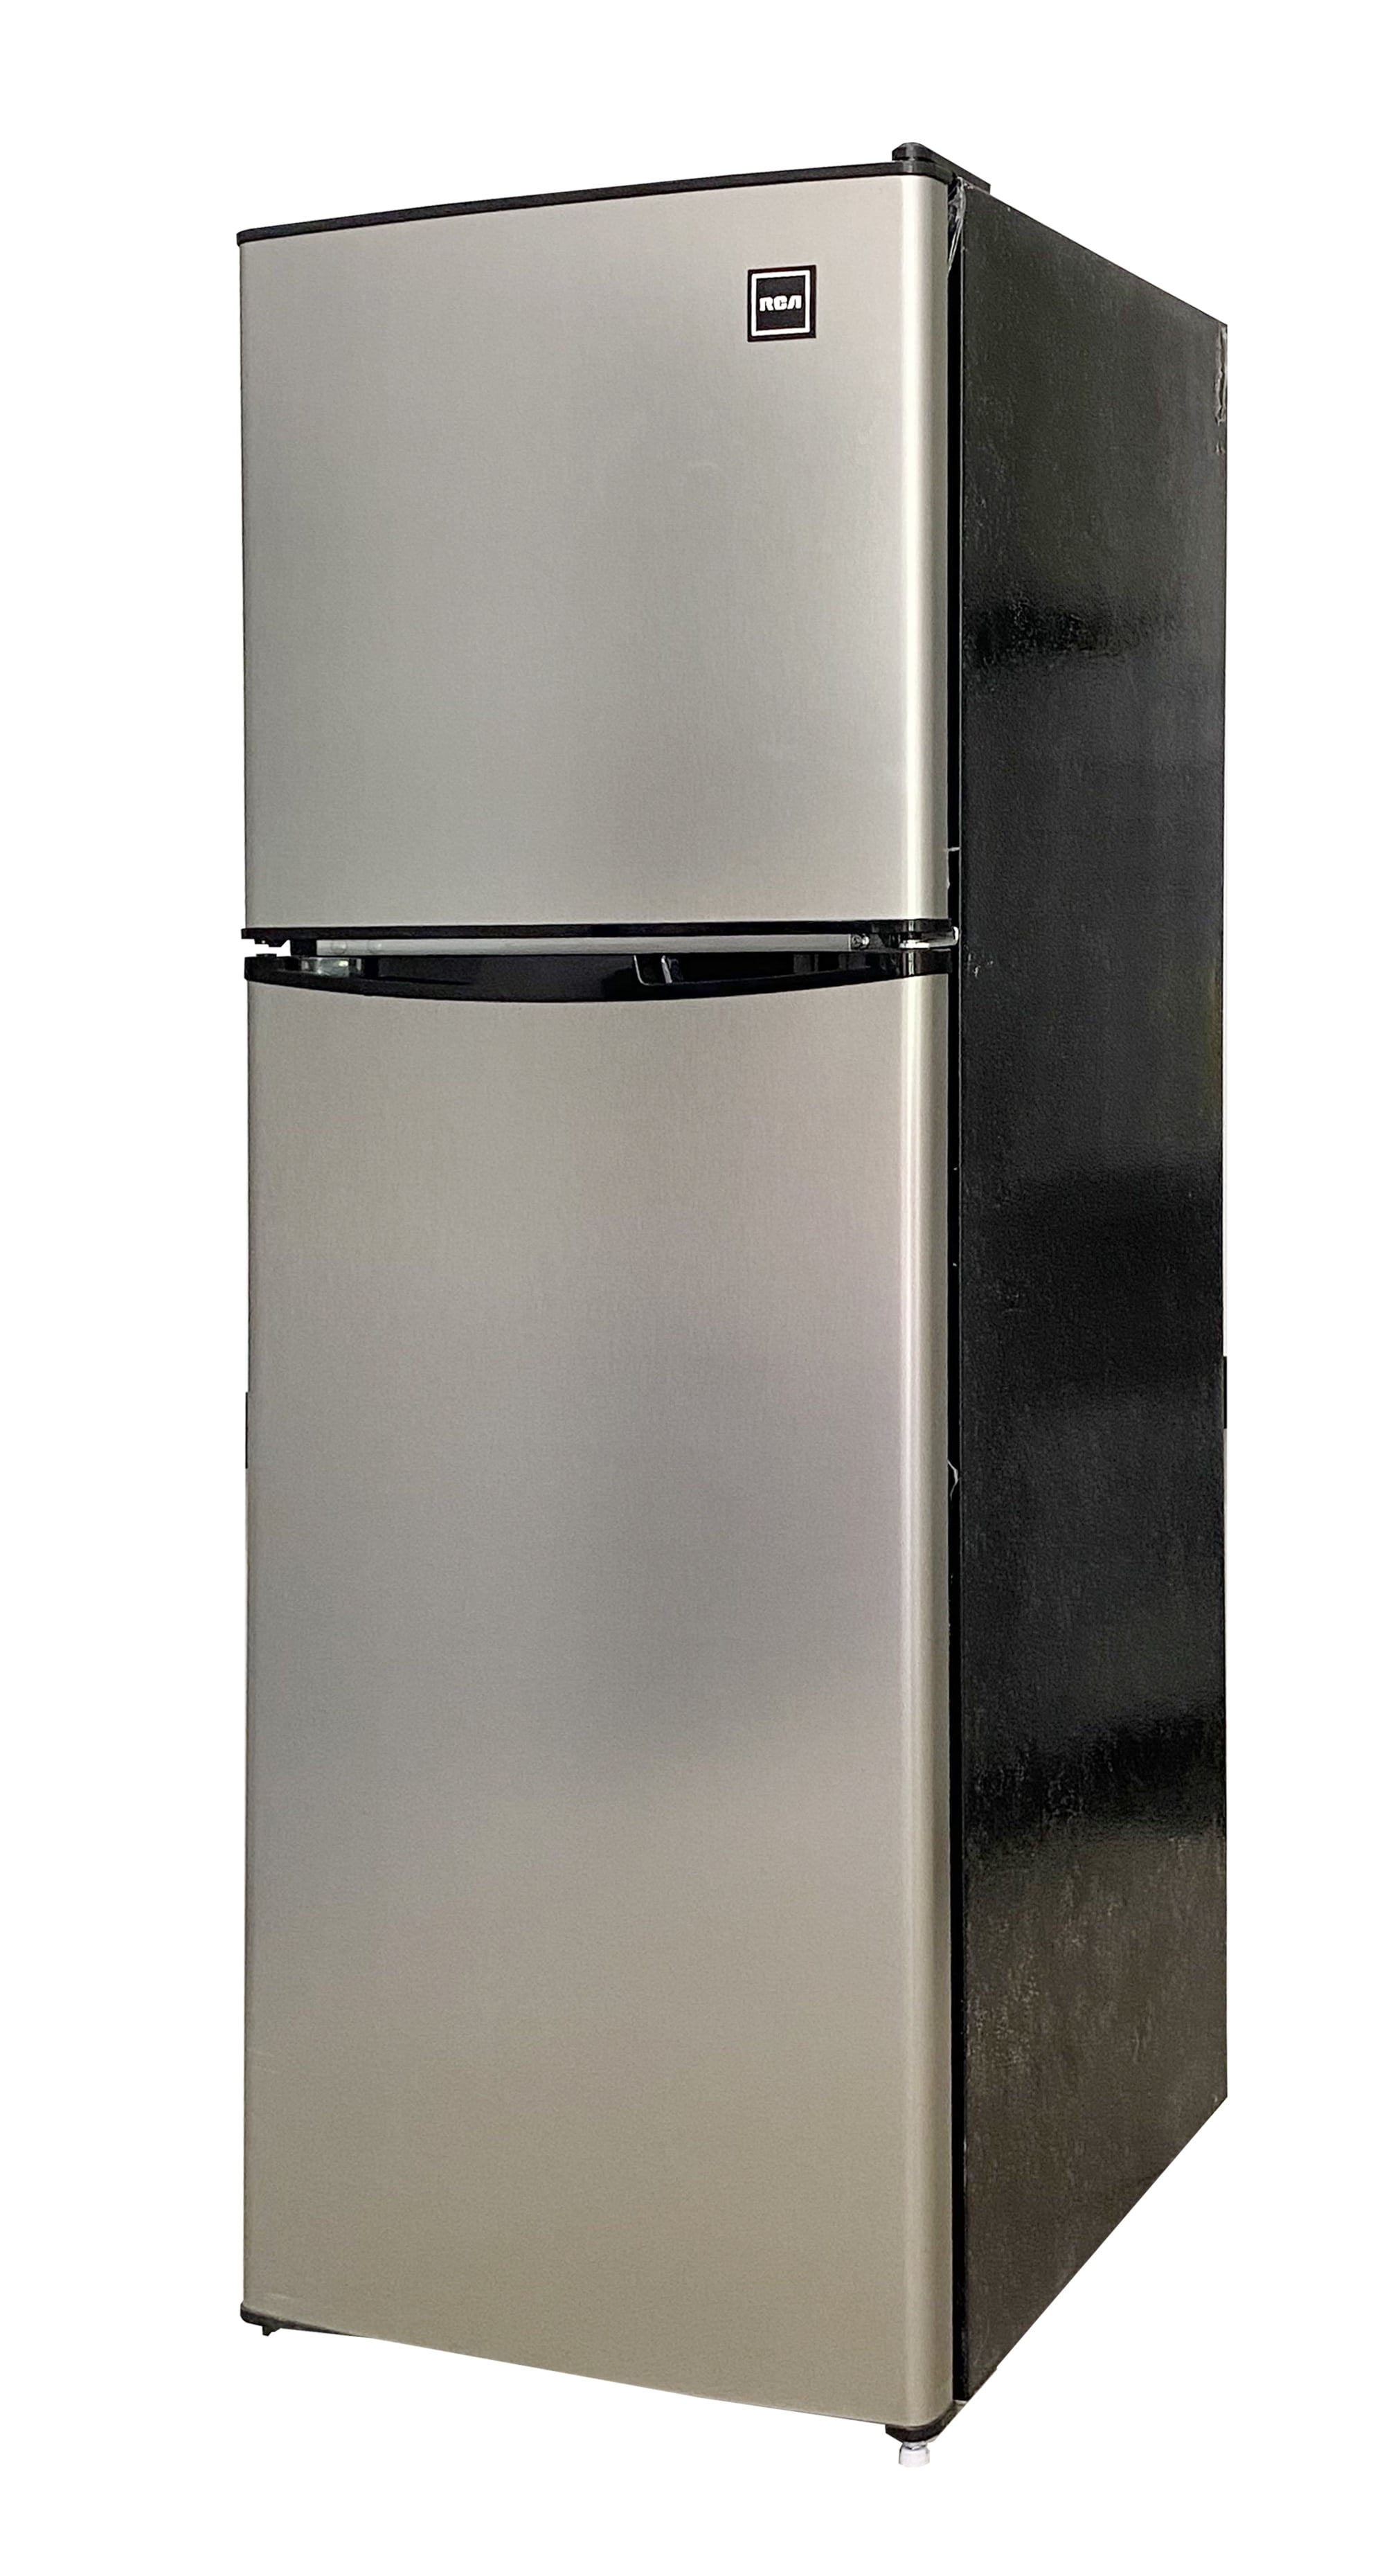 RCA RFR459 Compact Fridge with Freezer-Dual Adjustable Thermostat-Reversible Doo